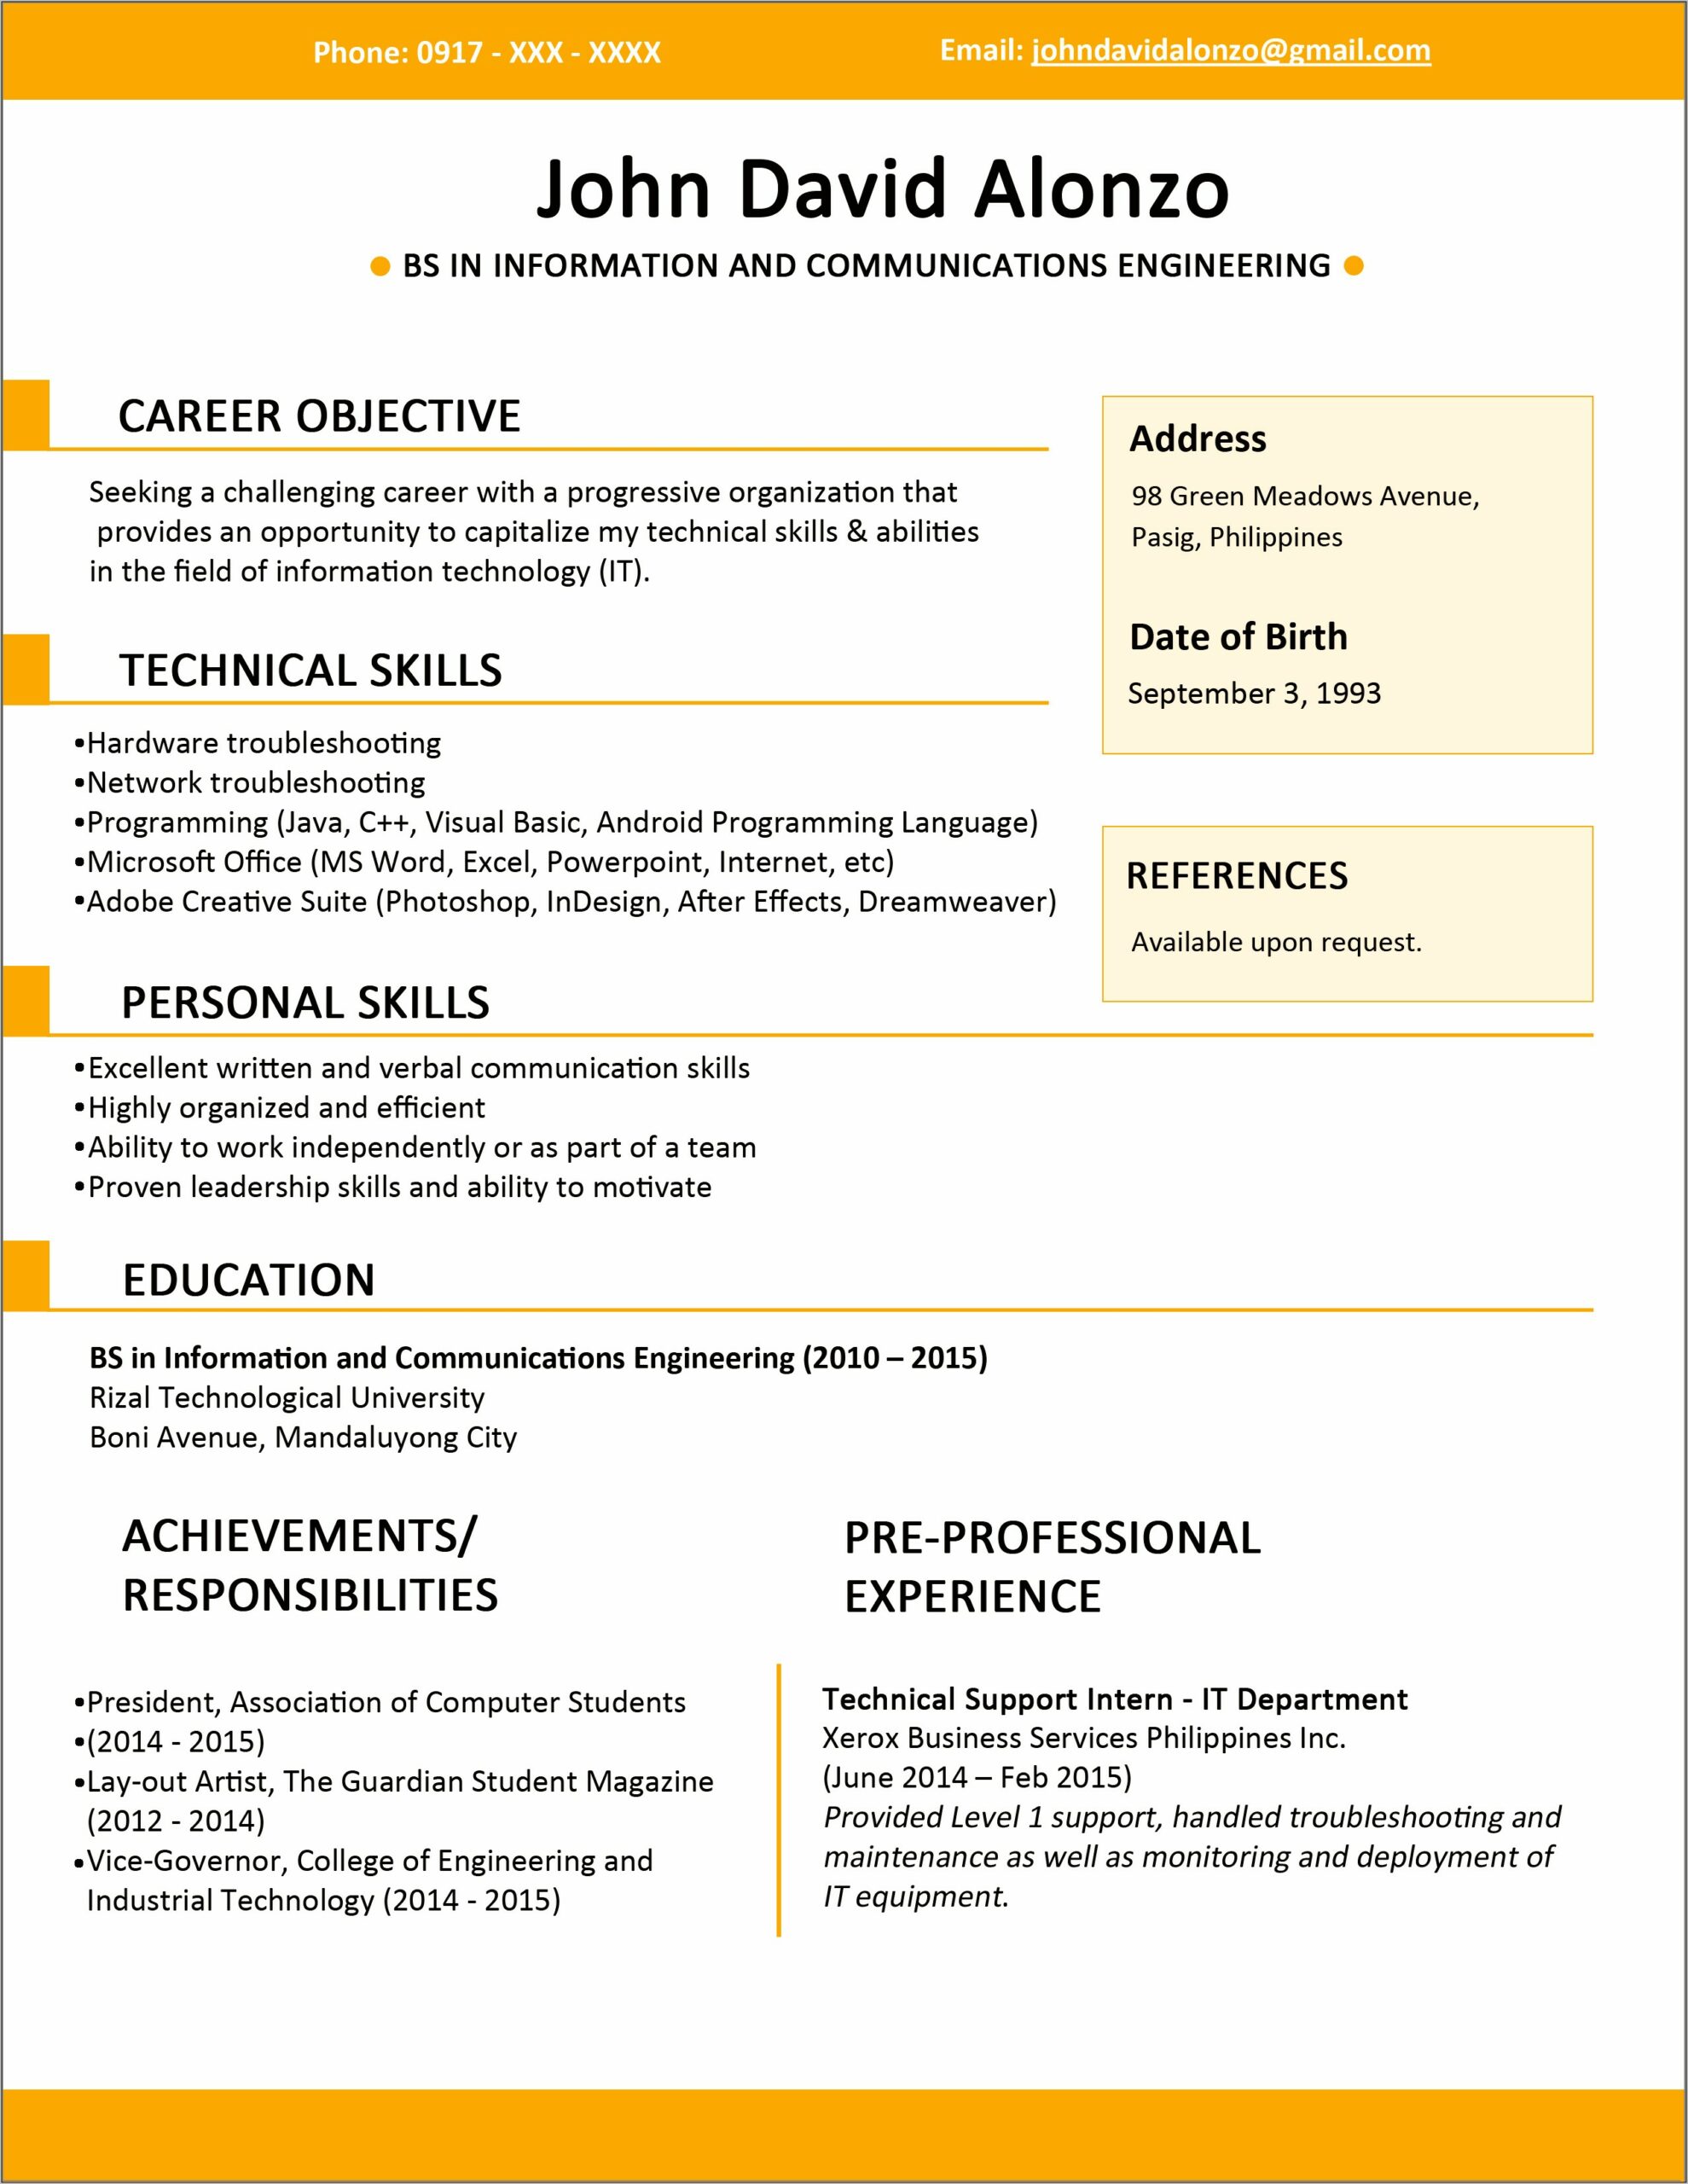 Latest Resume Format Sample In The Philippines